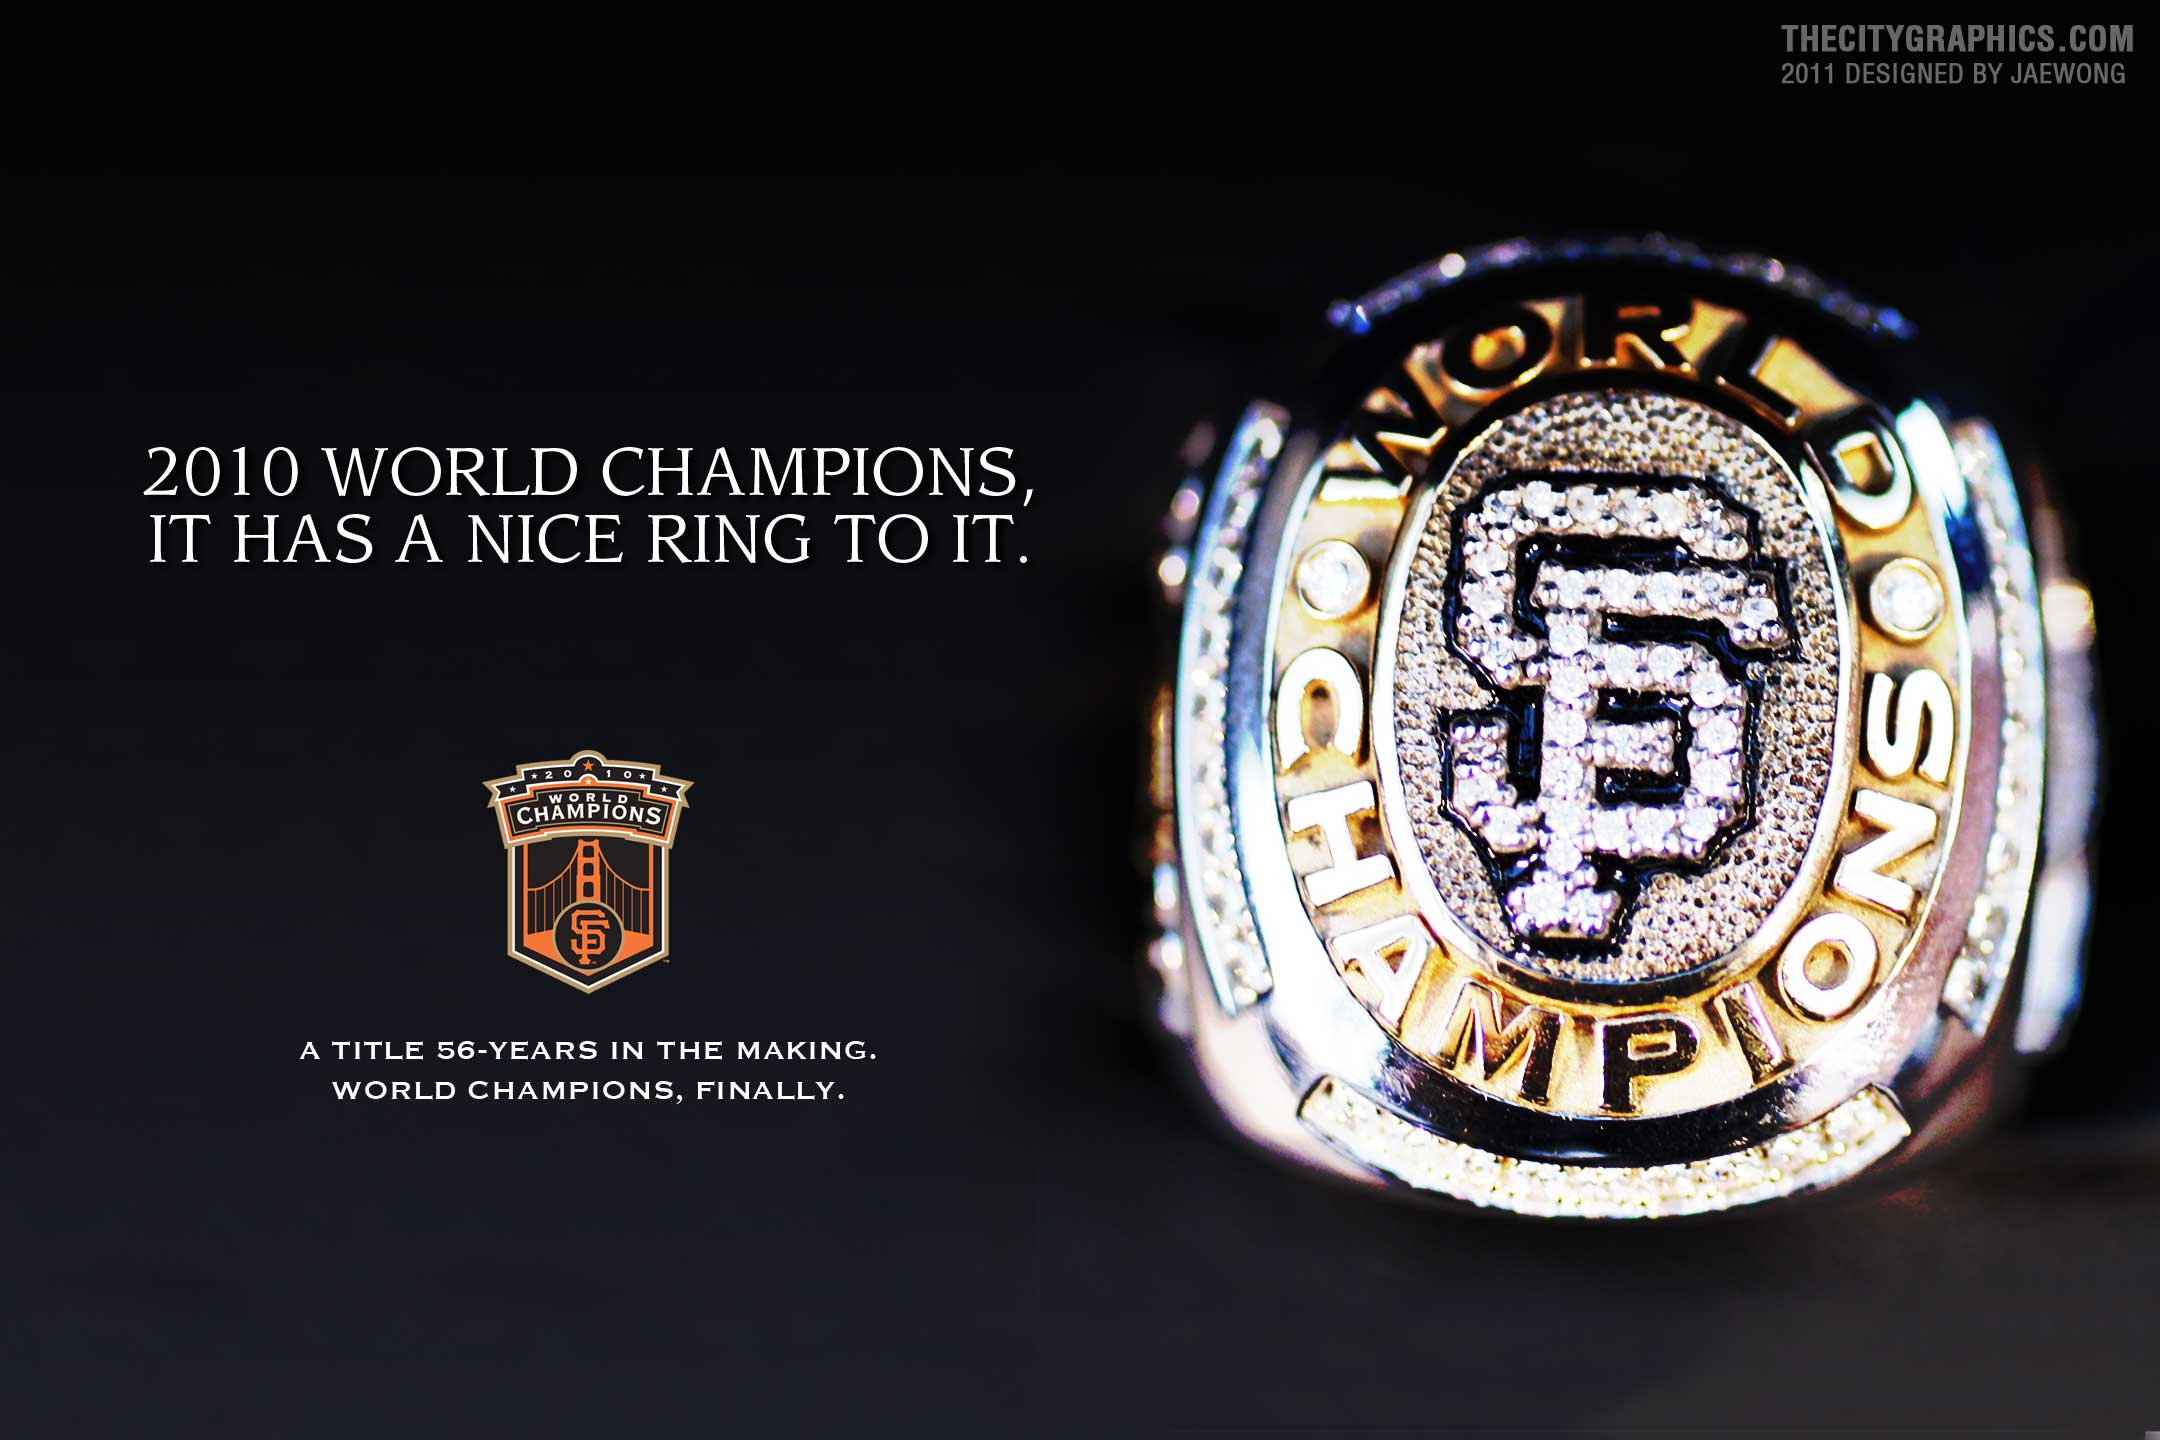 San Francisco Giants Wallpapers (65+ images inside)